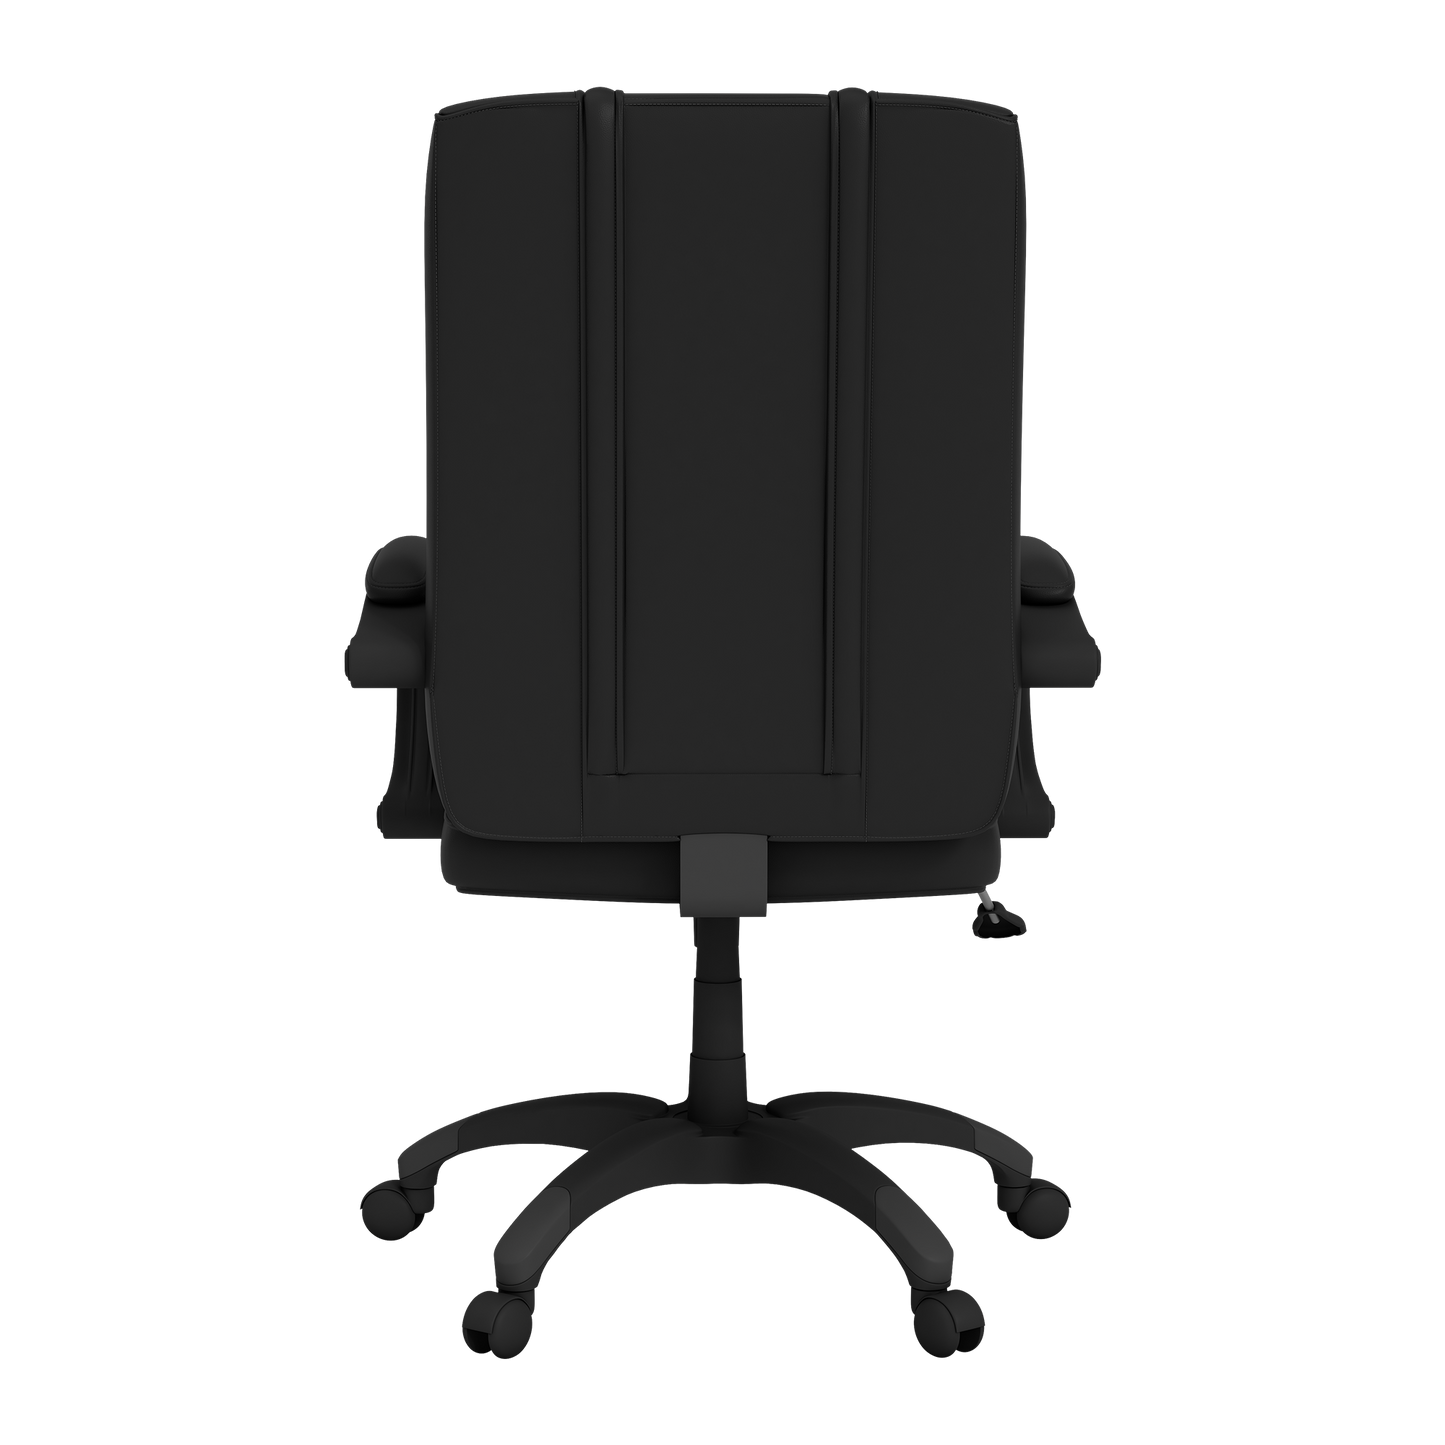 Office Chair 1000 with Phoenix Suns S